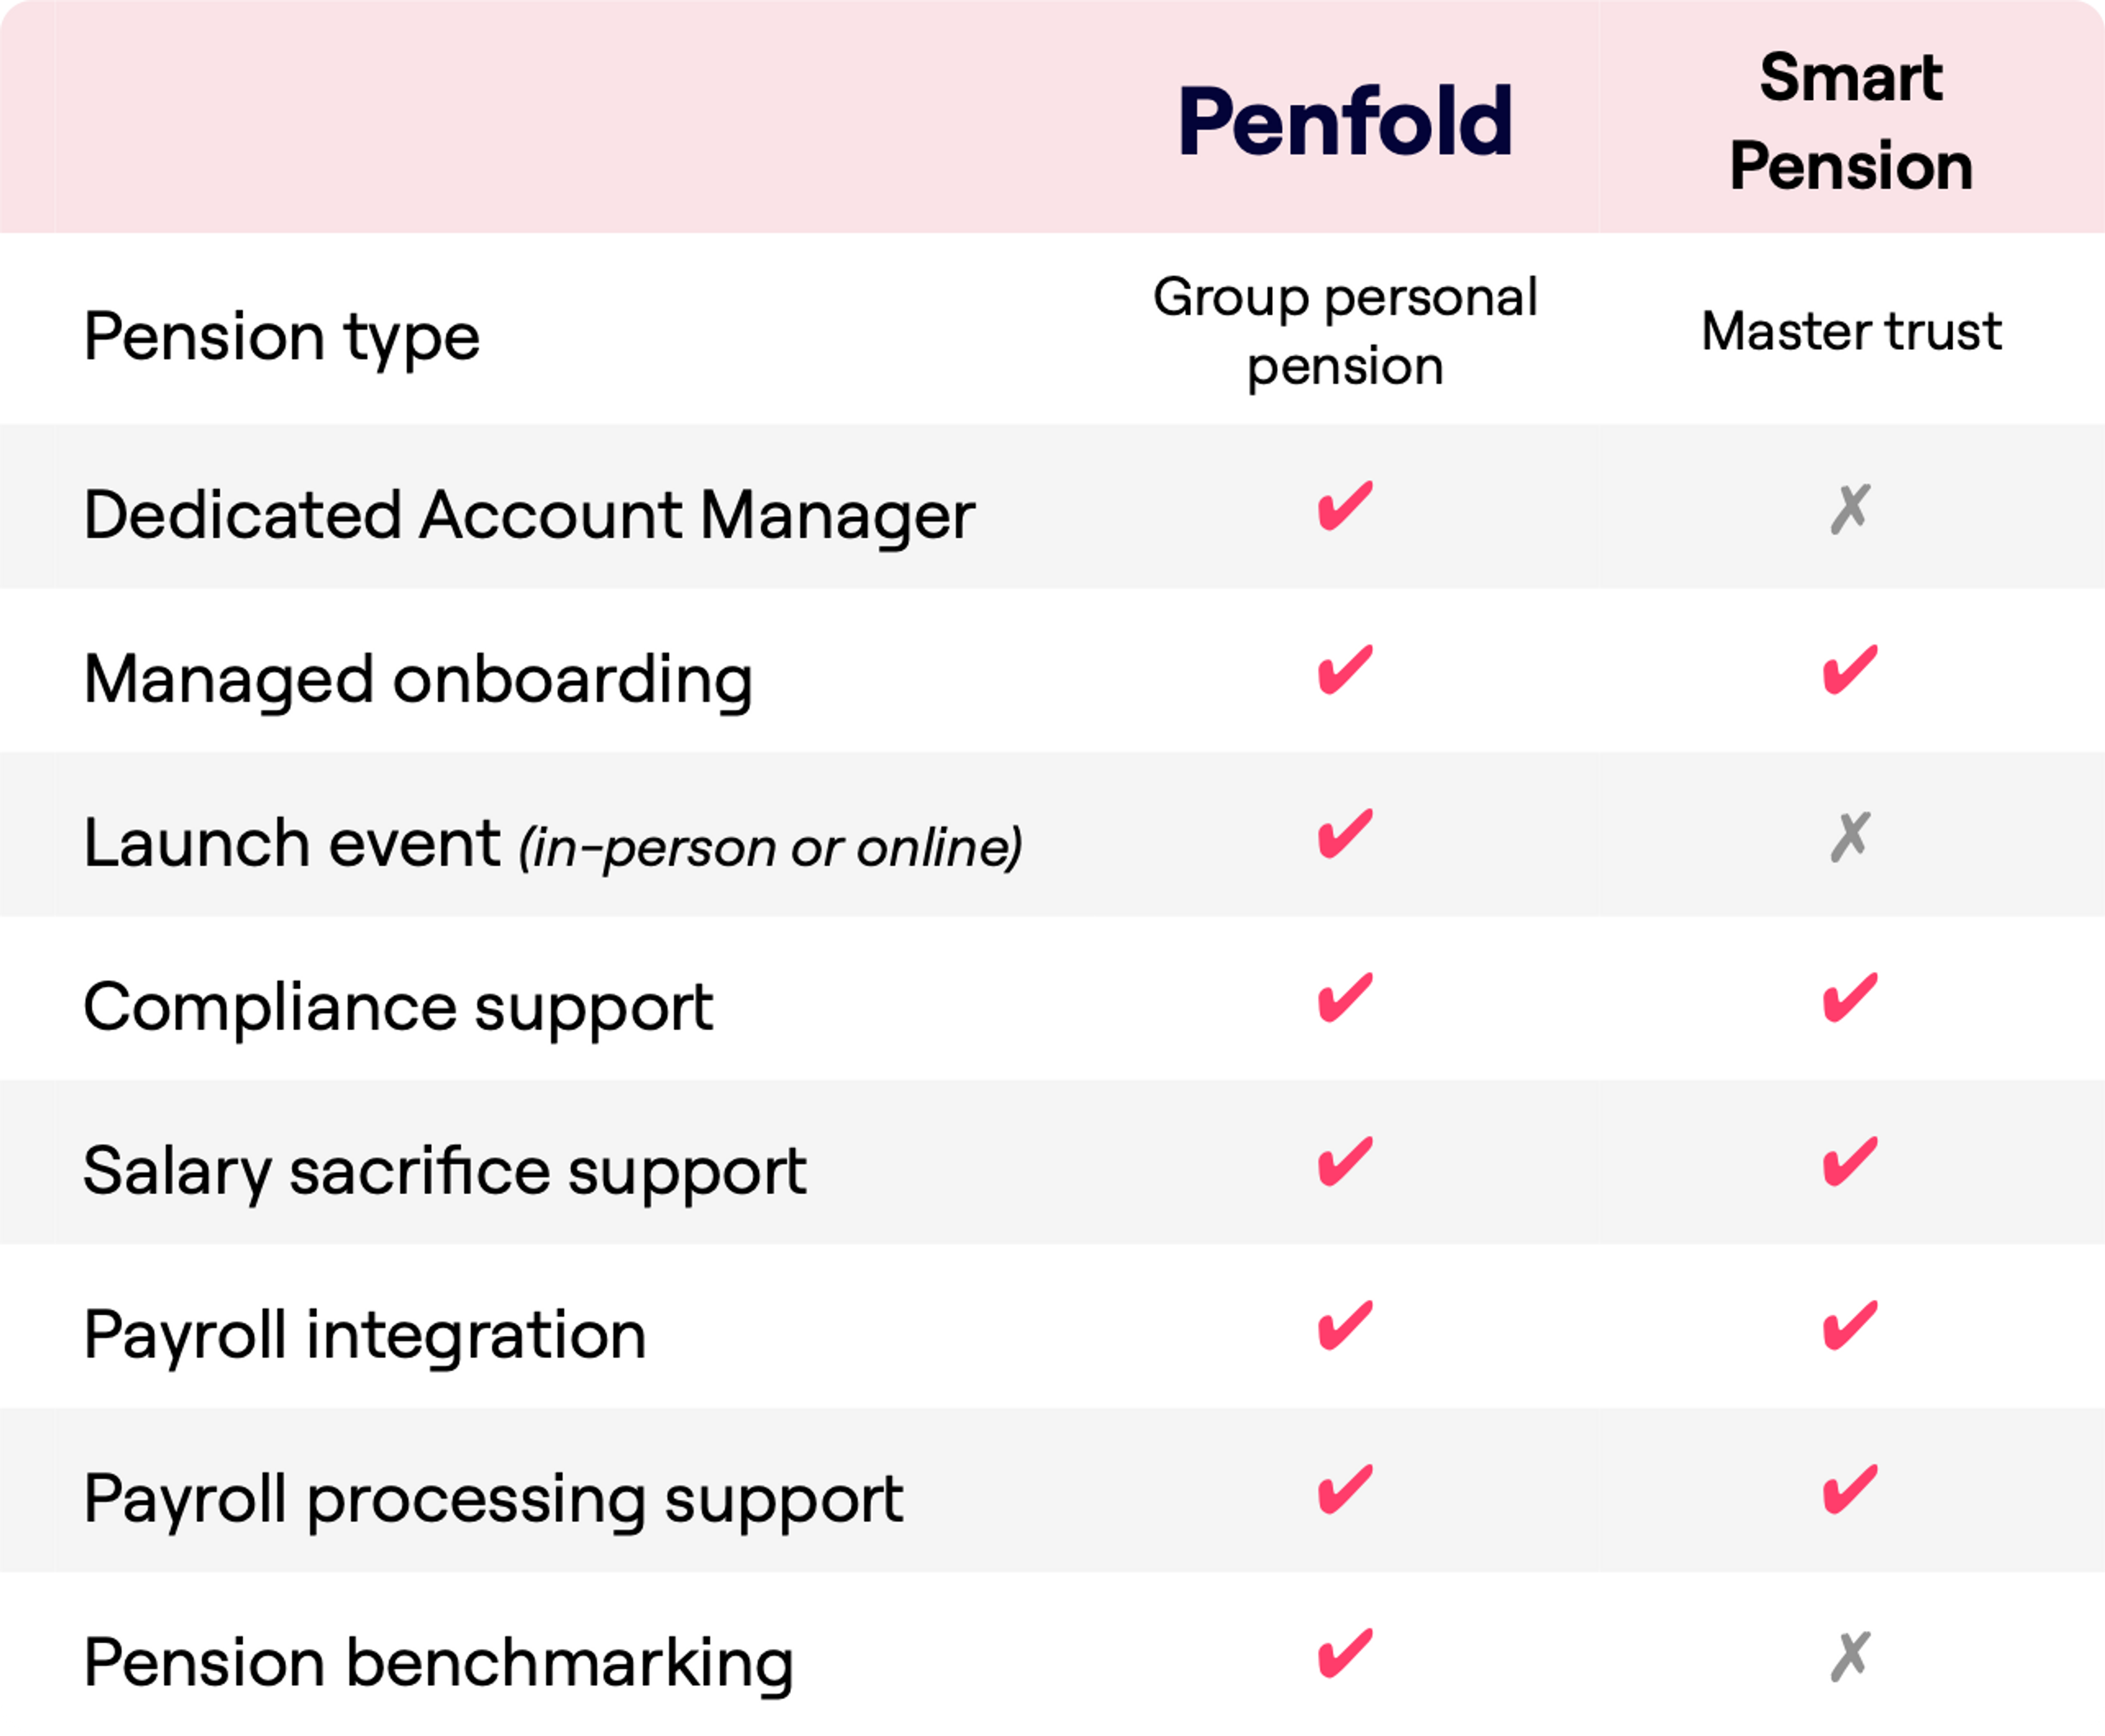 A comparison chart between two pension services, Penfold and Smart Pension. The chart lists features such as "Dedicated Account Manager," "Managed onboarding," and "Pension benchmarking," with check marks indicating availability. Penfold is categorized as "Group personal pension" and offers all listed features. Smart Pension, labeled as "Master trust," lacks "Dedicated Account Manager," "Launch event (in-person or online)," and "Pension benchmarking."